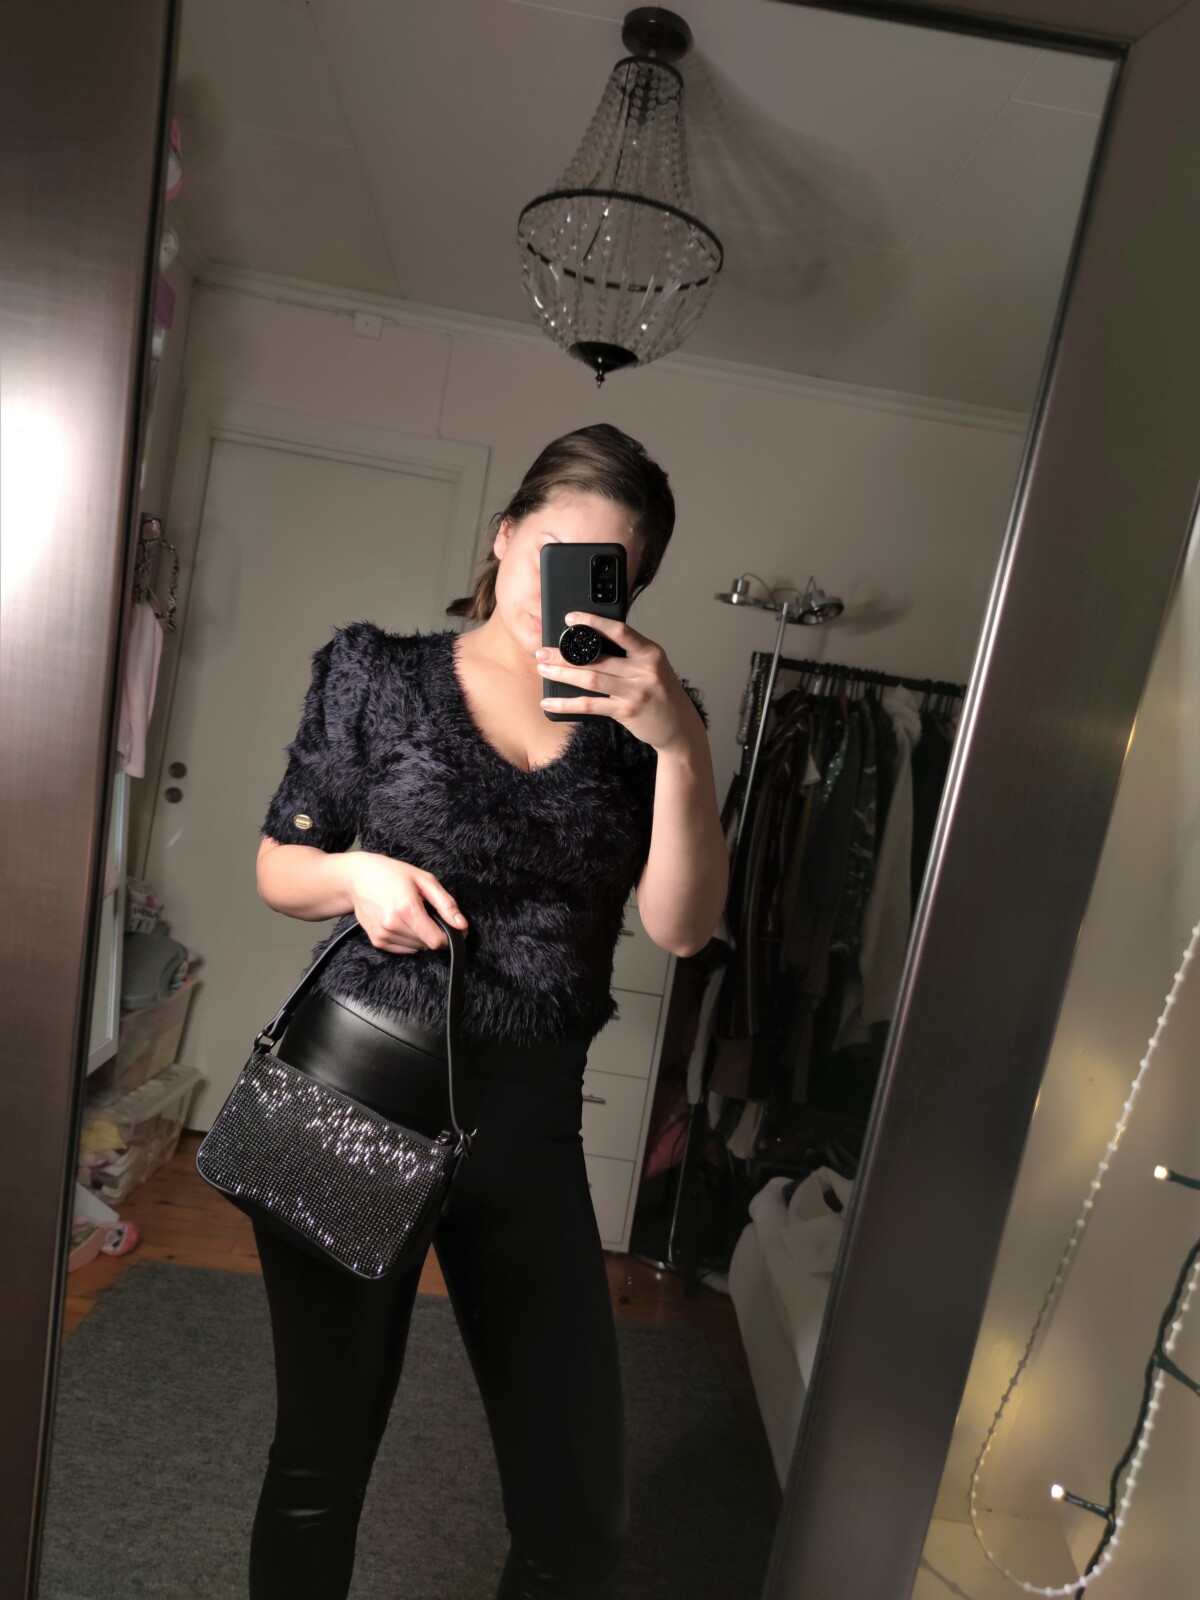 bubbleroom-newin-innkjøp-isalicious-isalicious.blogg_.no-isalicious1-blogg-mote-trend-stil-style-fashion-look-outfit-antrekk-outfits-antrekker-shopping-shop-nettshopping-klær-clothes-news